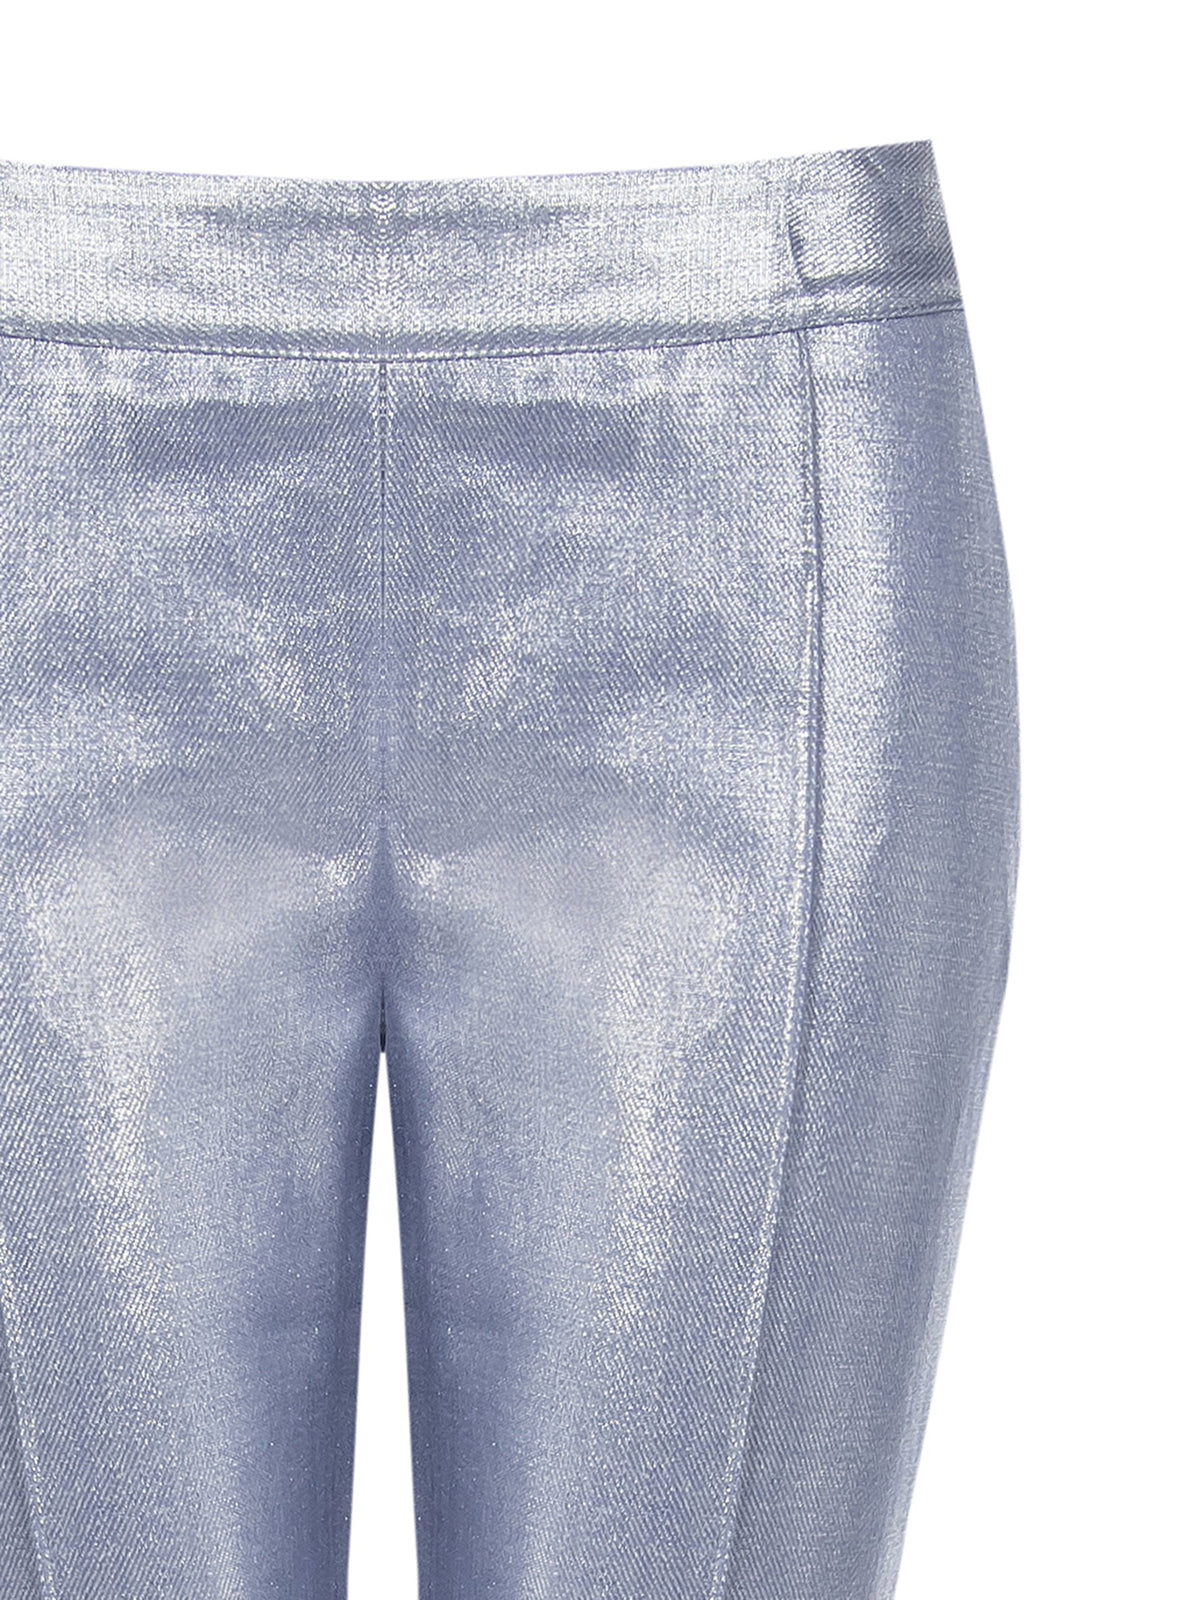 Flared Trousers in Laminated Denim